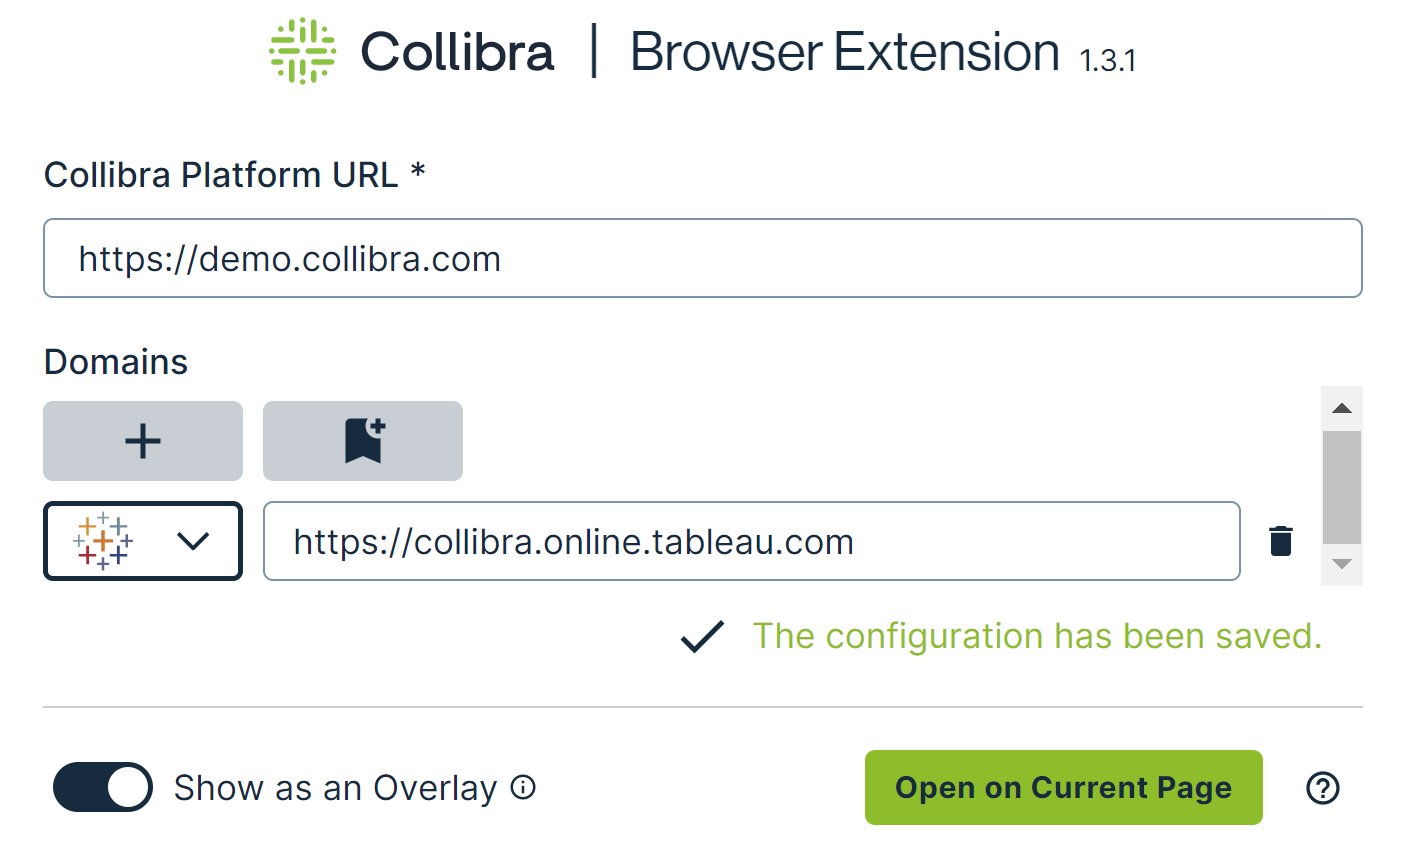 Browser Extension configuration